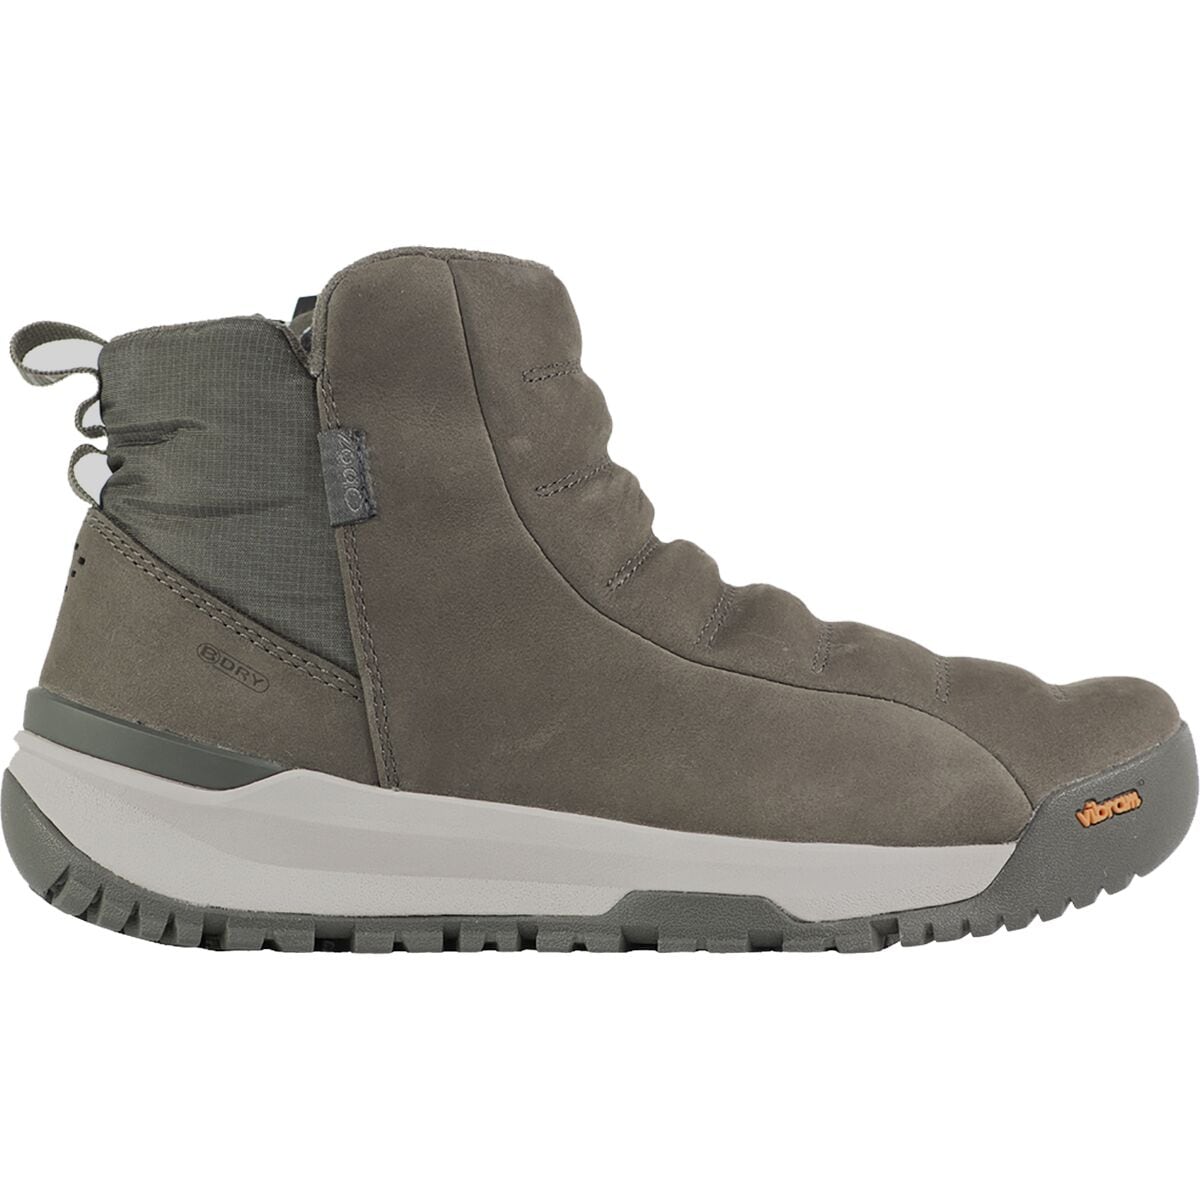 Sphinx Pull-On Insulated B-DRY Boot - Women